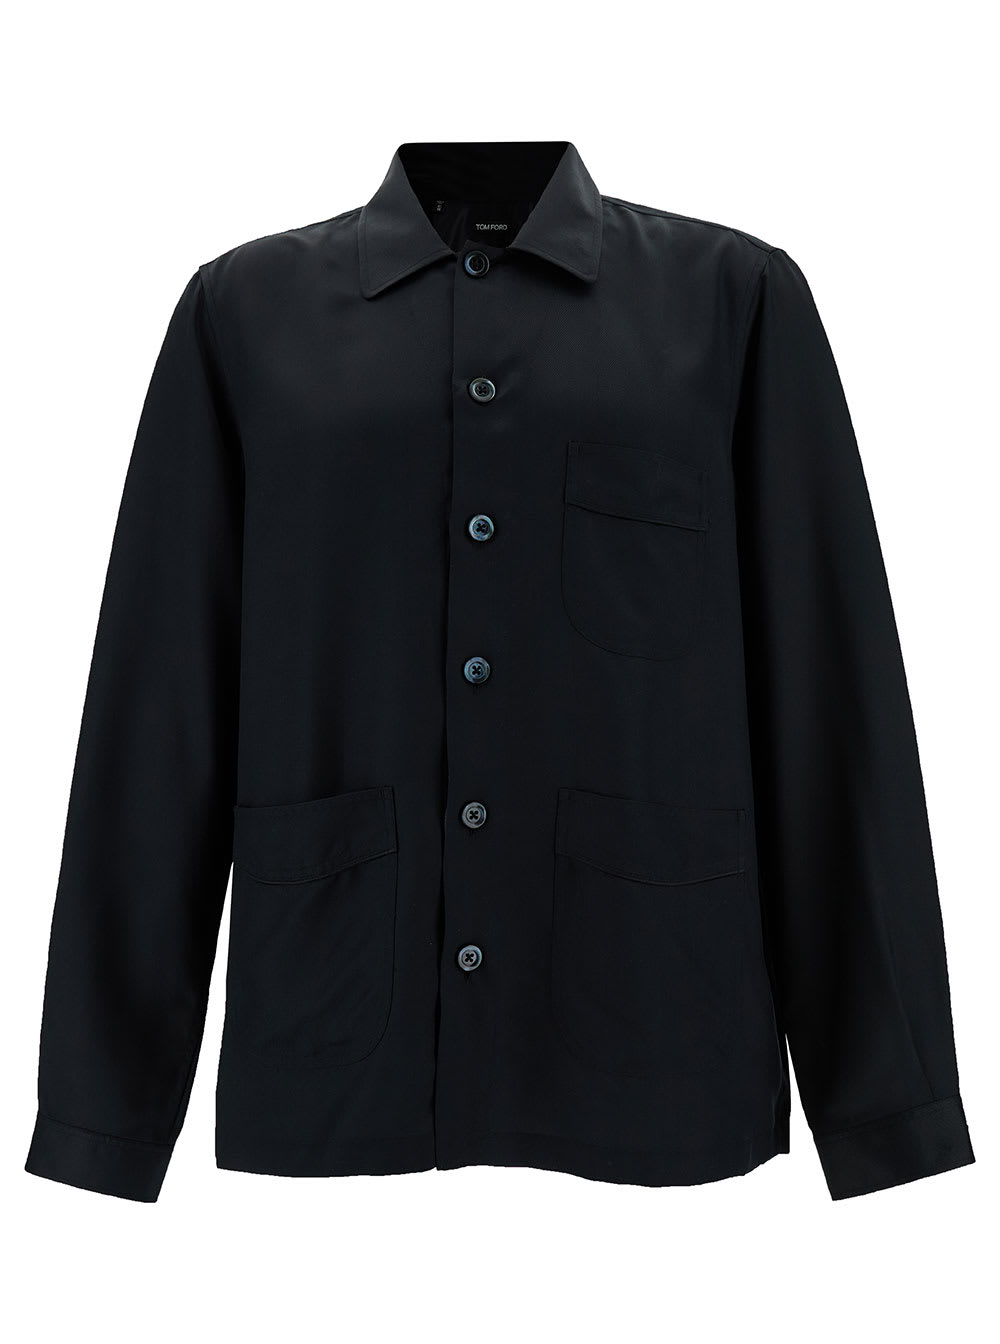 TOM FORD BLACK SHIRT WITH PATCH POCKETS IN SILK MAN